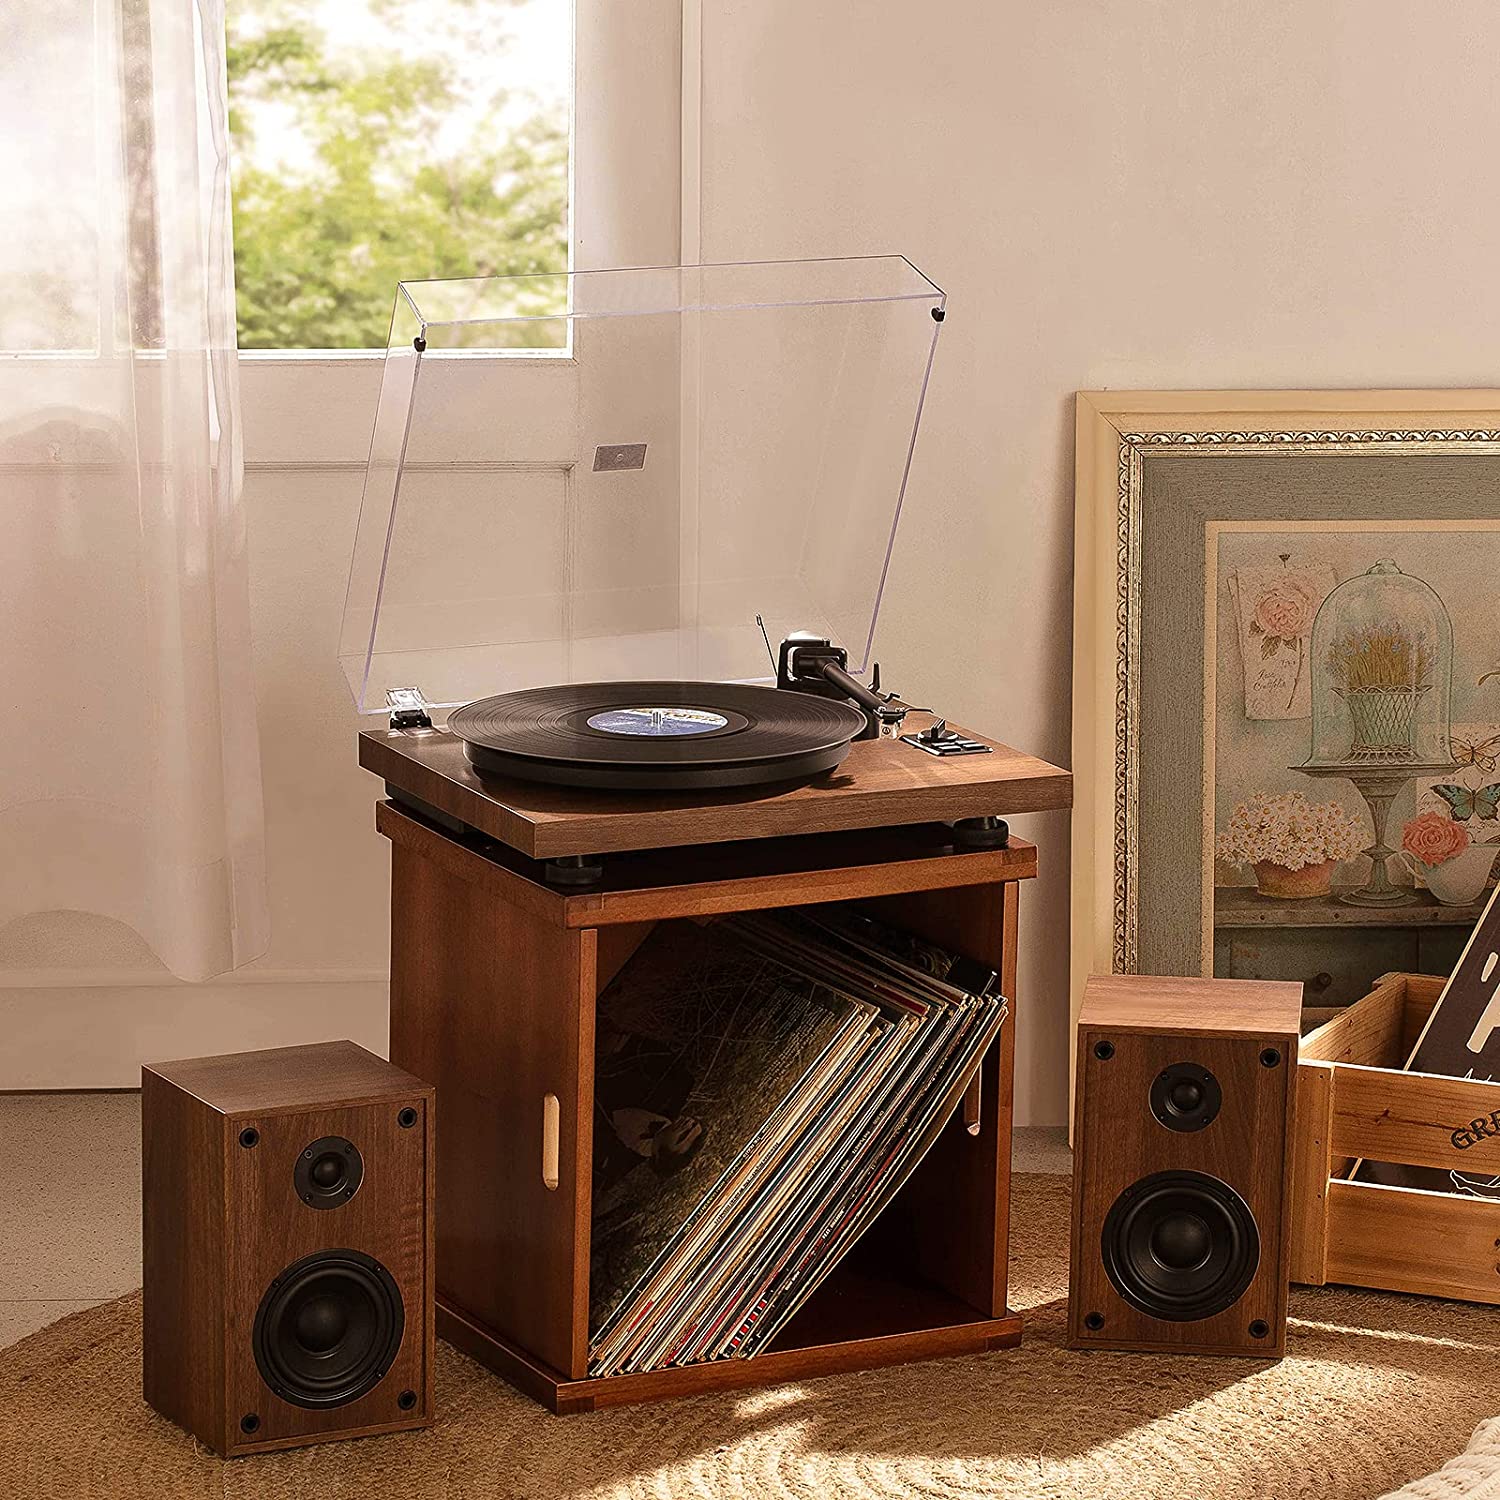 1 BY ONE Bluetooth Turntable from our guide to the best bluetooth record players